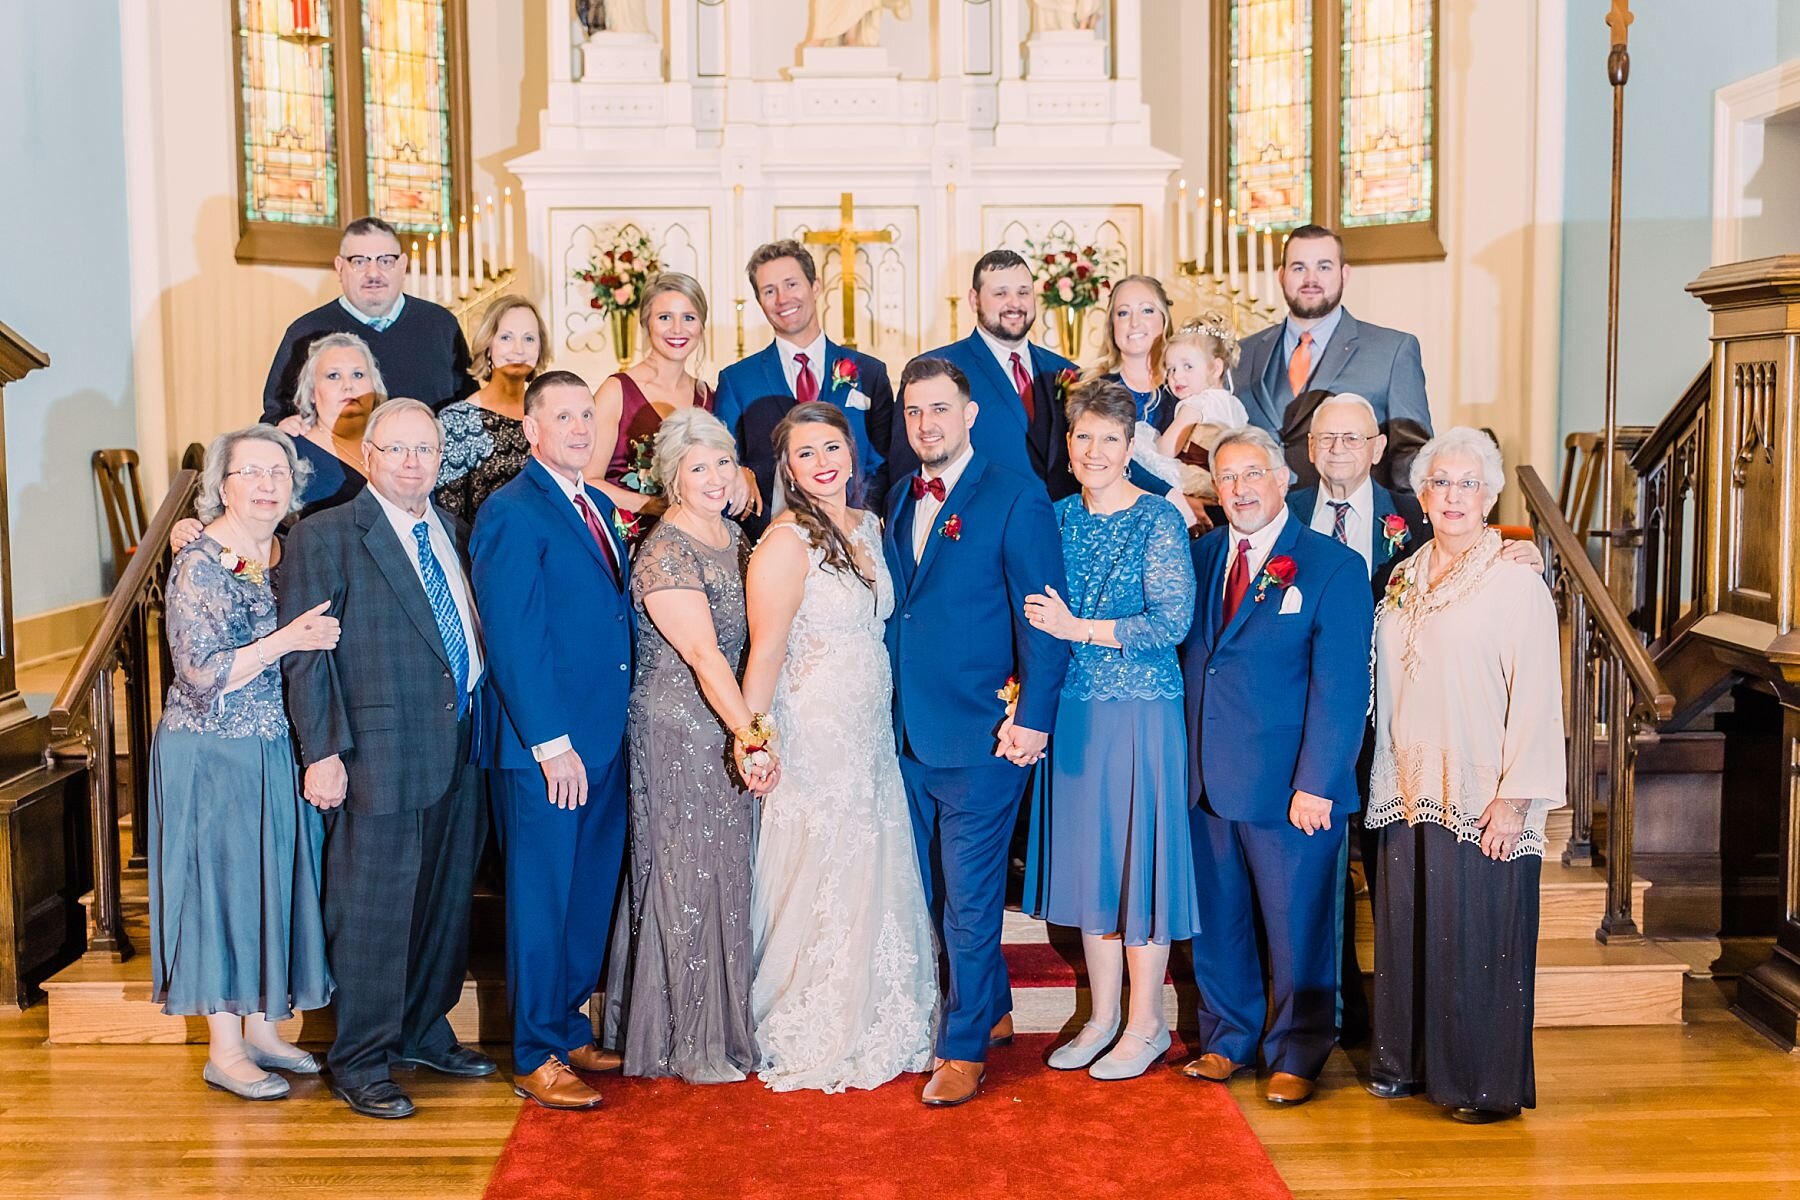 wedding party standing together in a church 